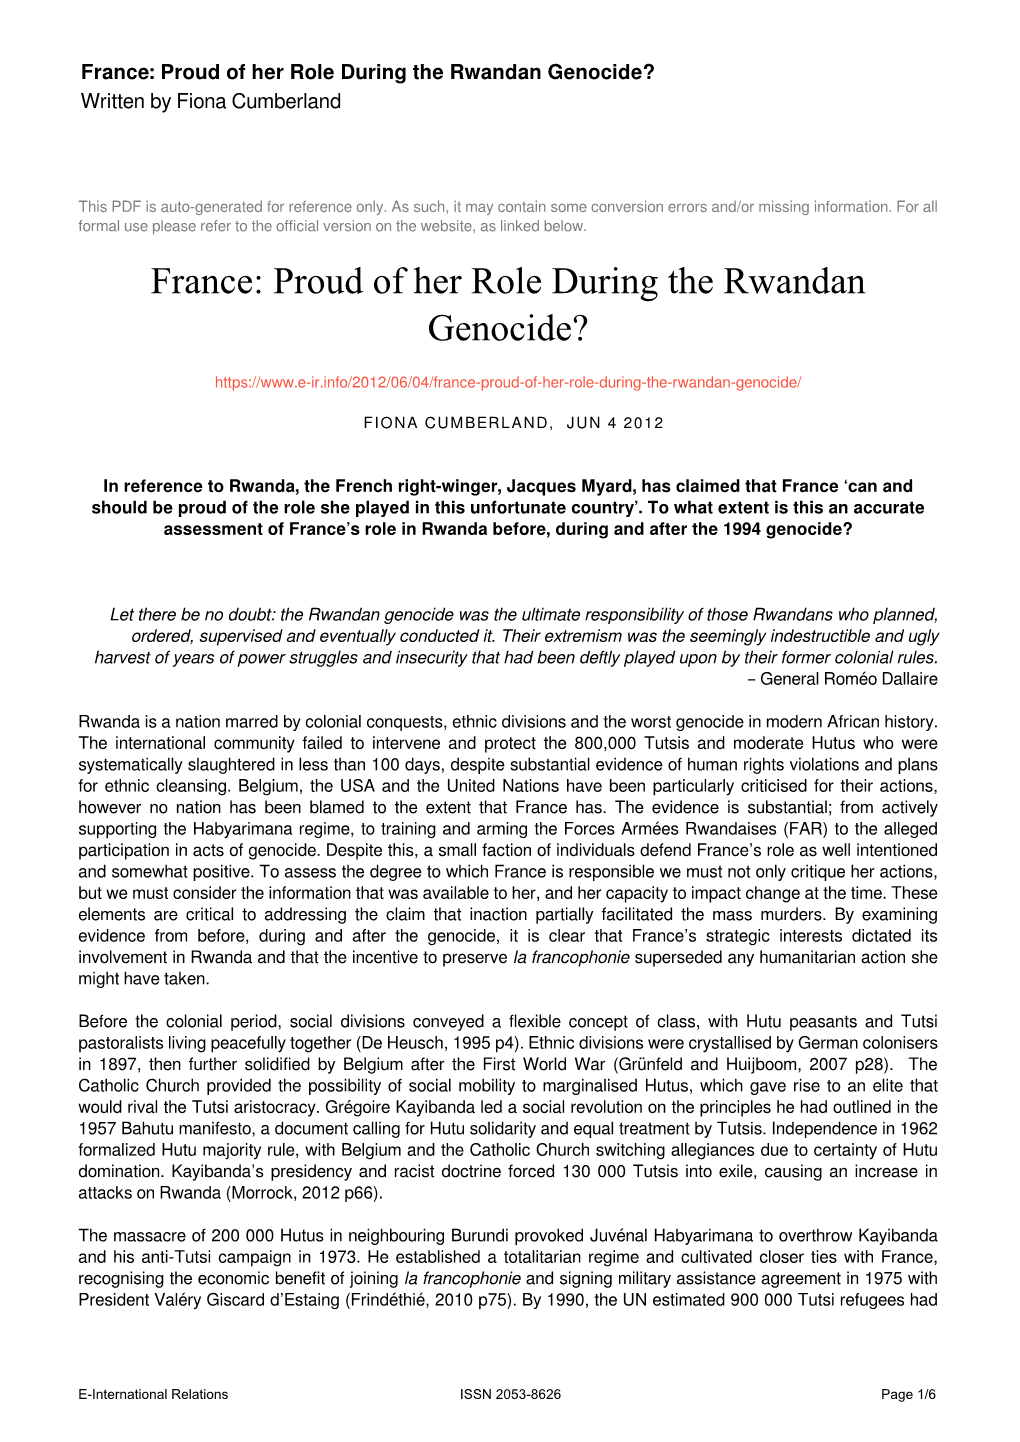 France: Proud of Her Role During the Rwandan Genocide? Written by Fiona Cumberland